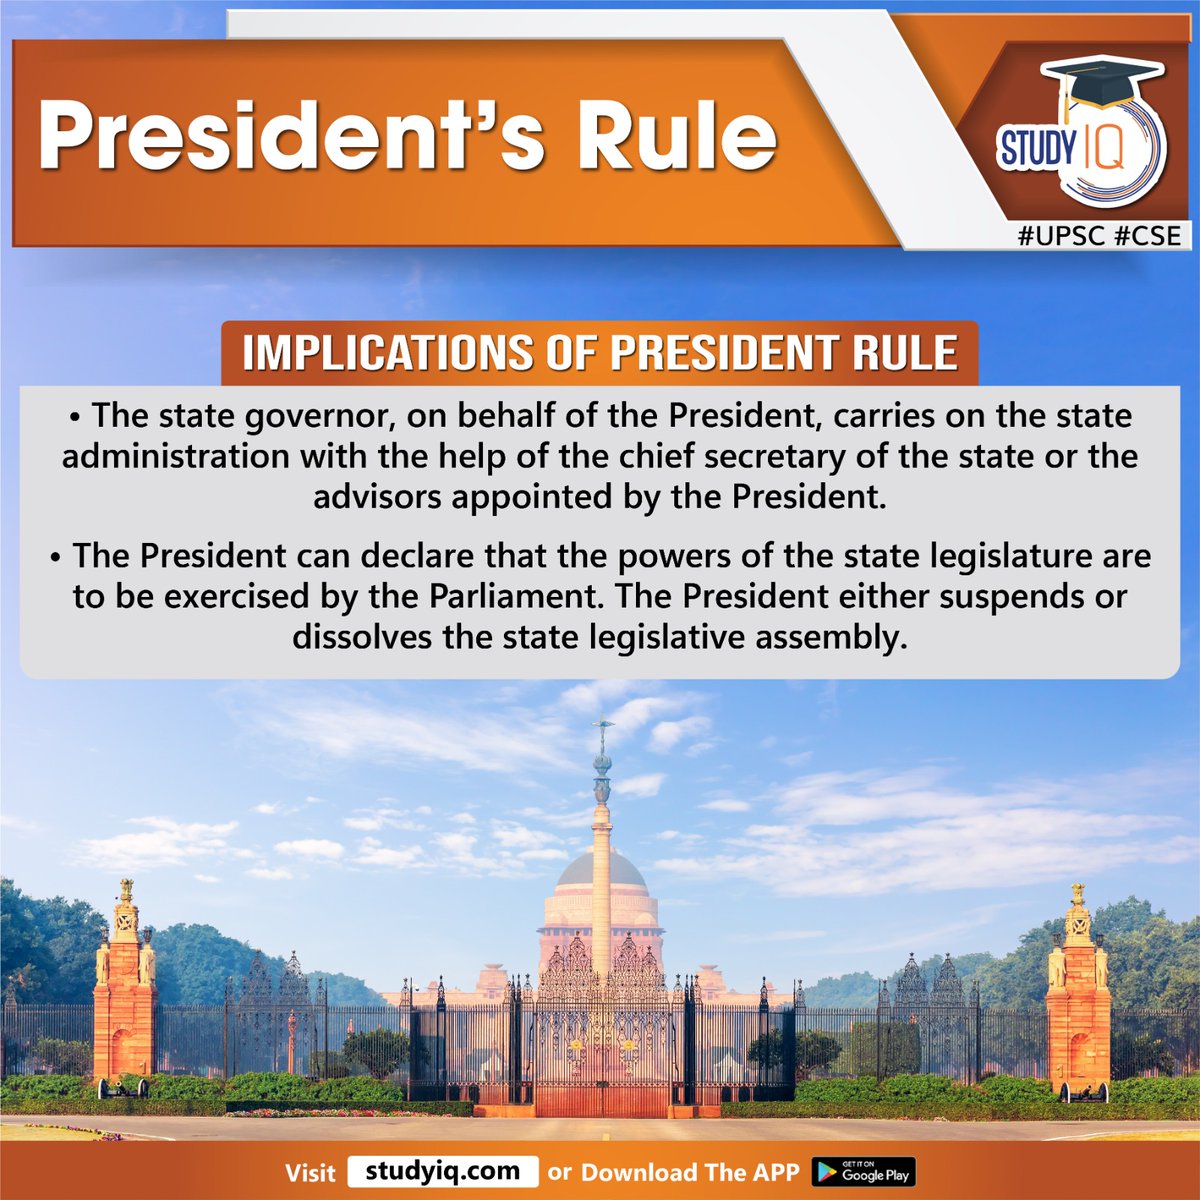 President's Rule

#presidentrule #manipur #manipurprotest #presidentruleinstate #centre #stateemergency #constitutionalemergency #article356 #indianconstitution #unioncouncilofministers #governor #housesofparliament #parliamentofindia #presidentofindia #chiefsecretary